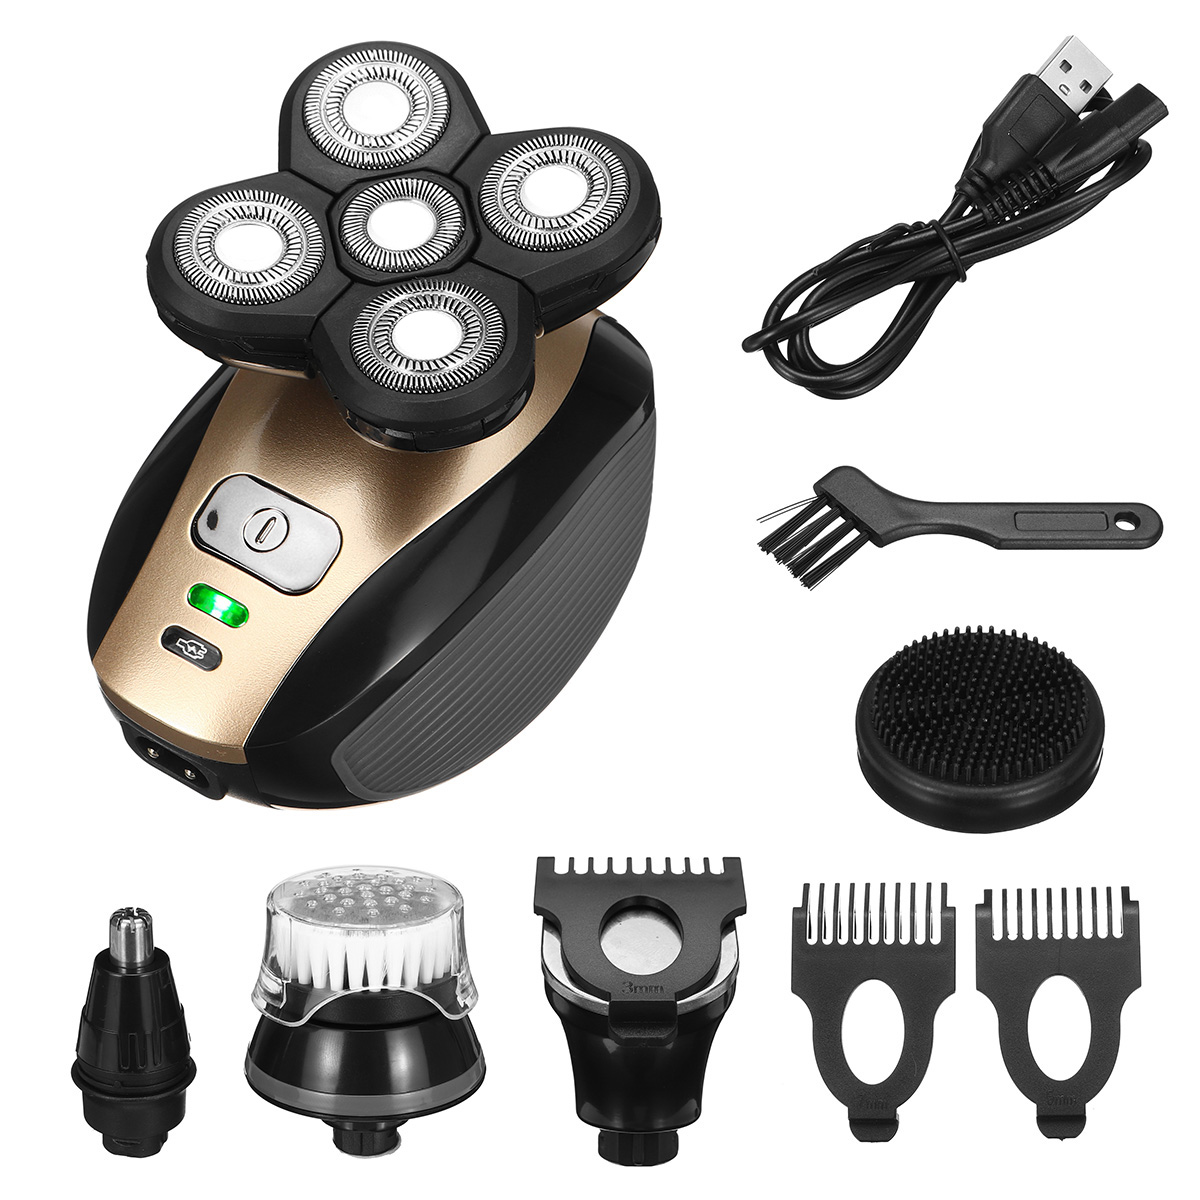 

USB 5 IN 1 4D Rotary Electric Shaver Rechargeable Bald Head Shaver Beard Trimmer